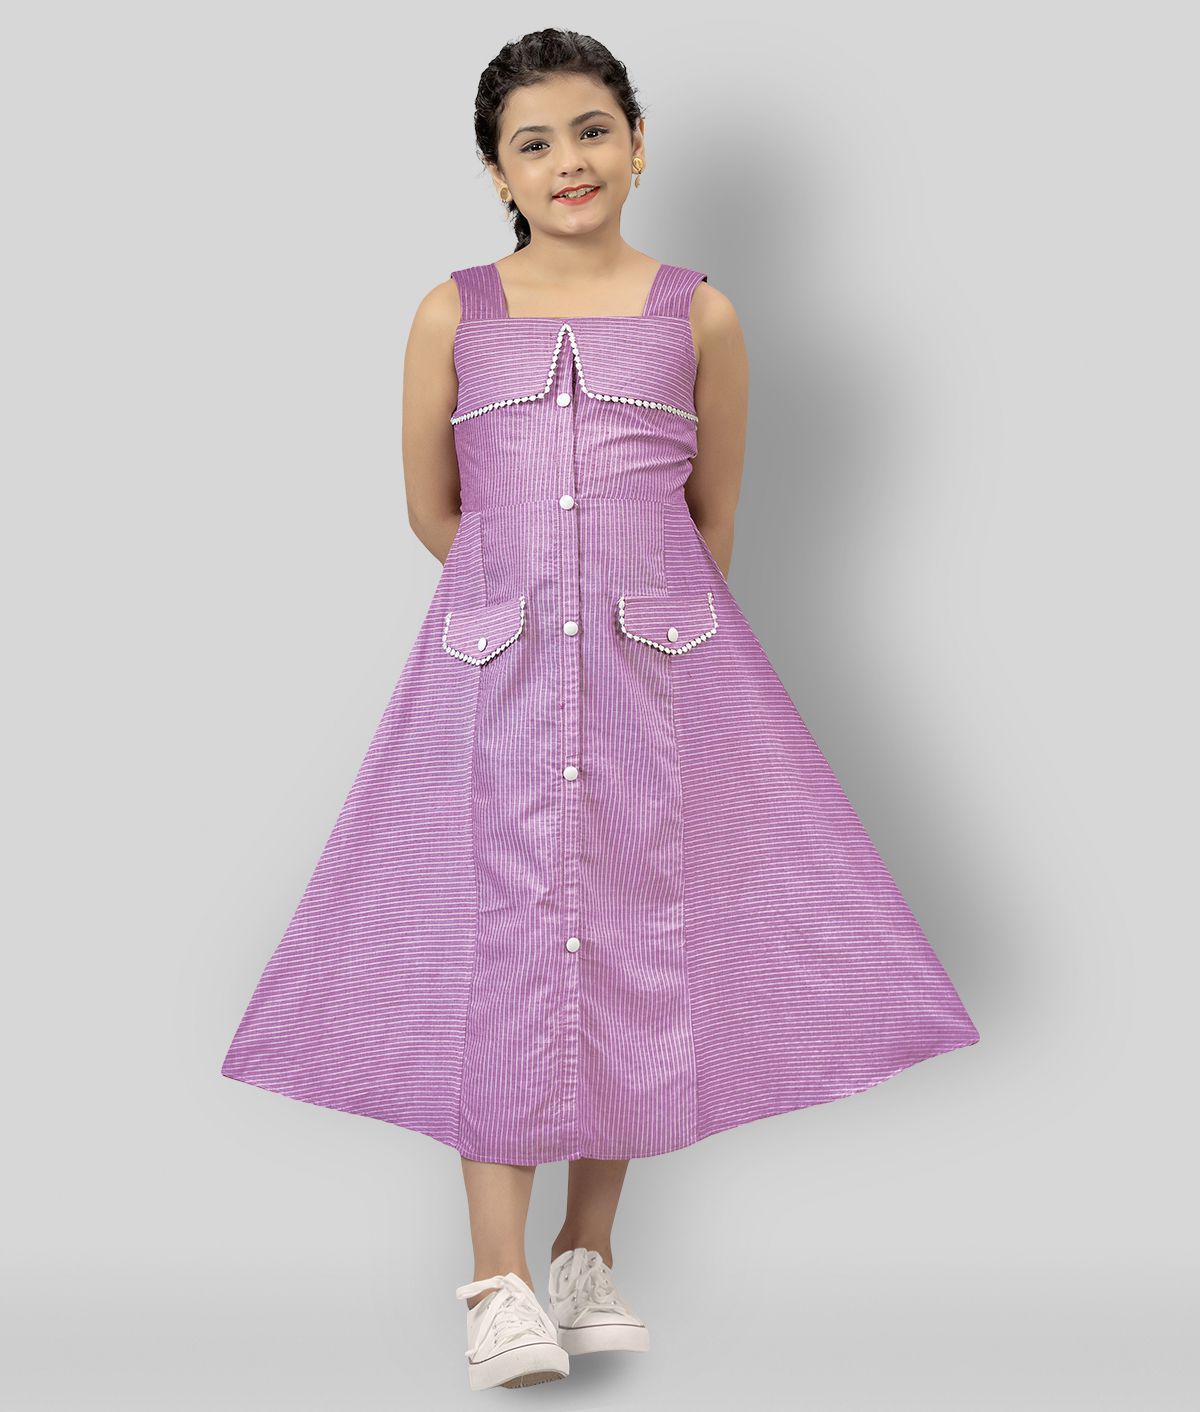     			Fashion Dream - Pink 100% Cotton Girl's A-line Dress ( Pack of 1 )